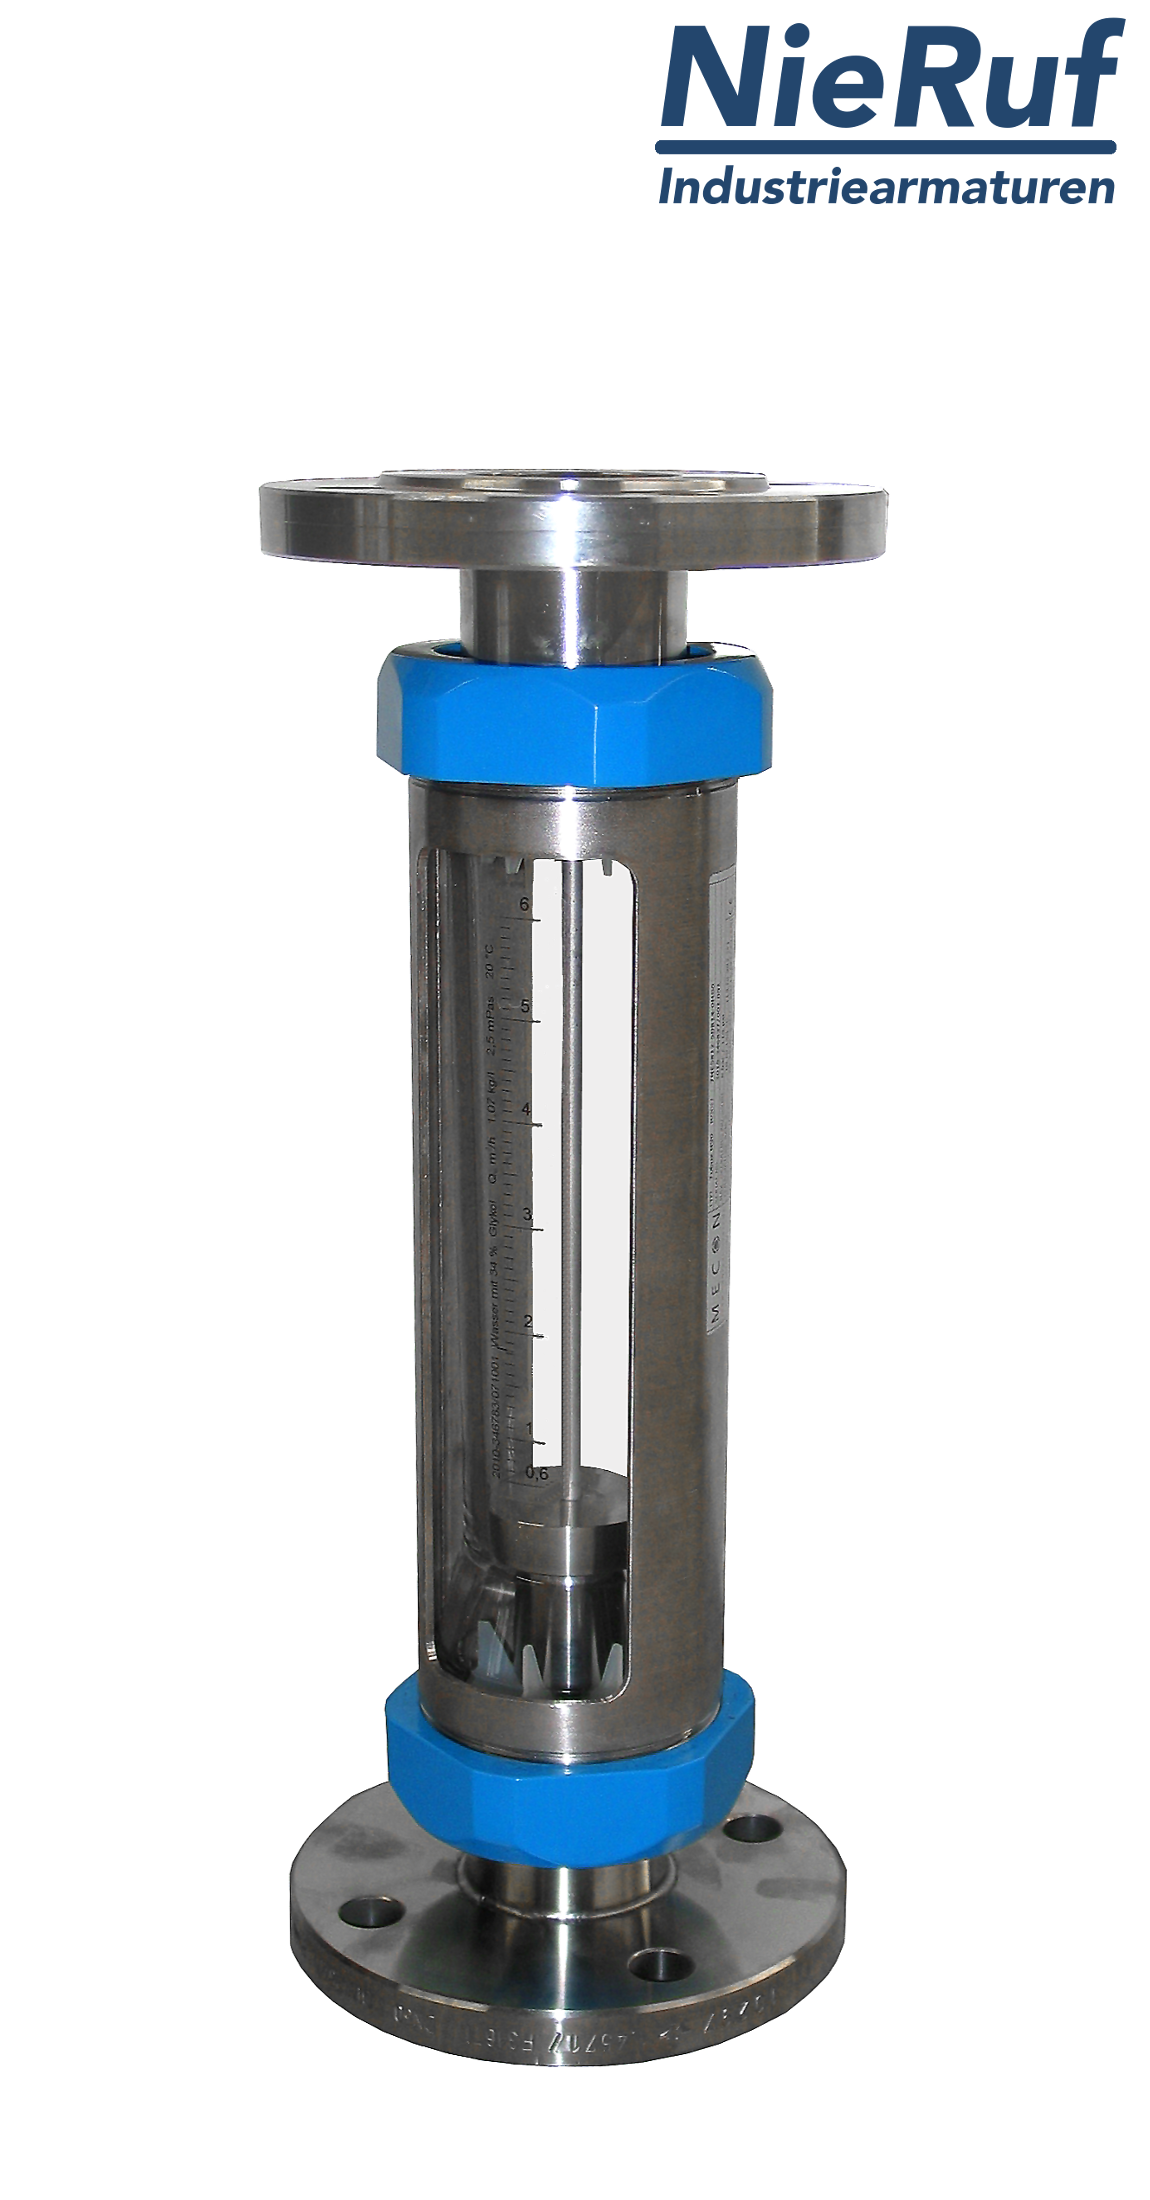 Variable area flowmeter stainless steel + borosilicate flange DN25 80.0 - 800 l/h water FKM